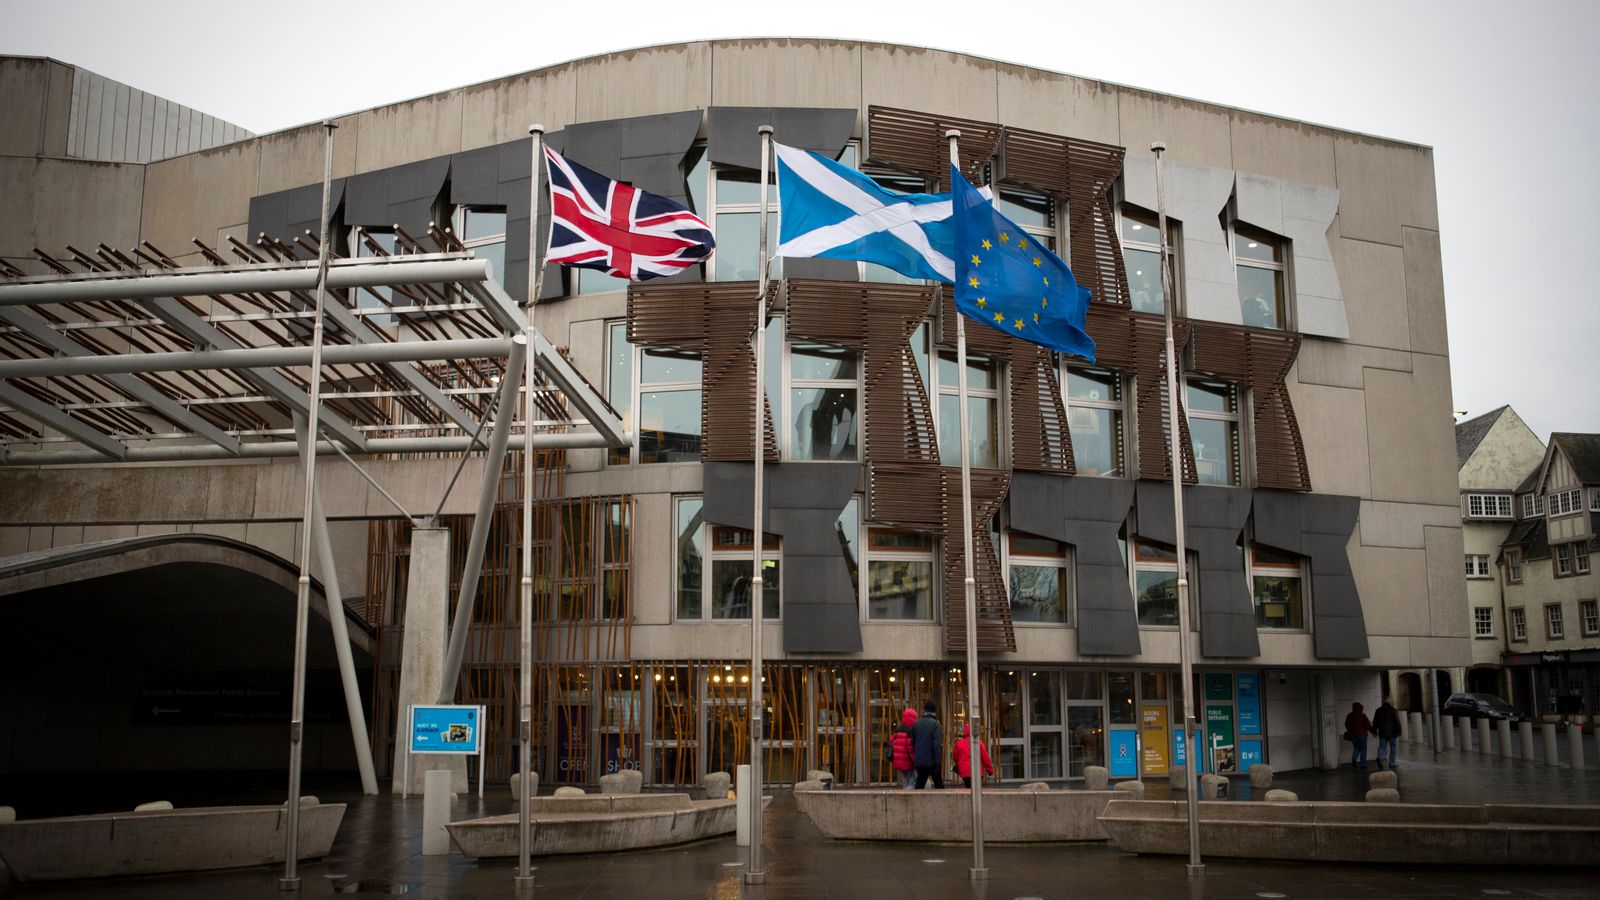 Scotland Gender Recognition Reform Bill: UK move to block legislation likely to escalate tensions with Holyrood